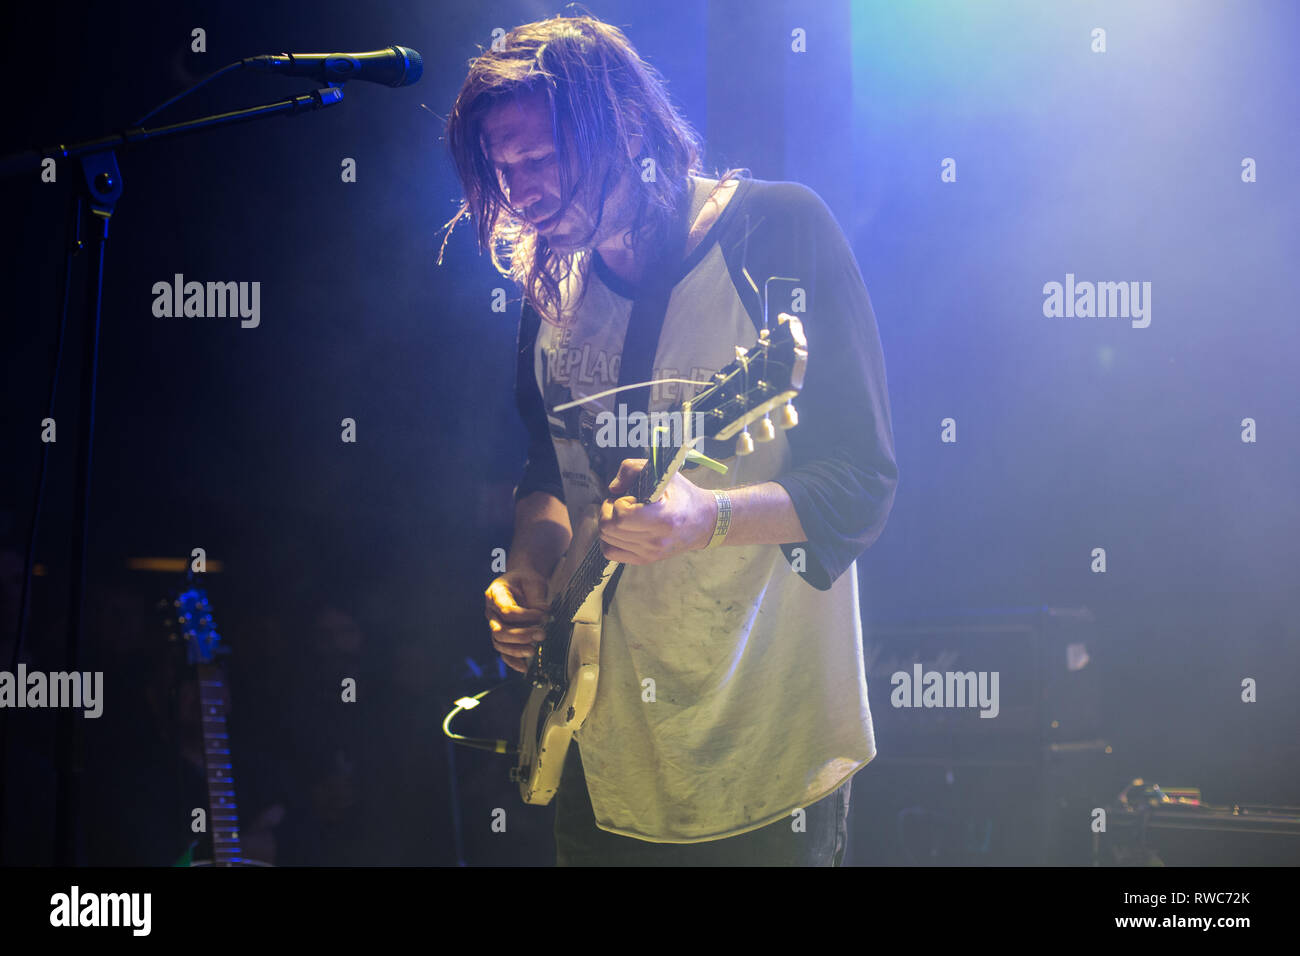 Norway, Oslo - March 5, 2019. The American rock band The Lemonheads performs a live concert at Blå in Oslo. Here singer and musician Evan Dando is seen live on stage. (Photo credit: Gonzales Photo - Per-Otto Oppi). Credit: Gonzales Photo/Alamy Live News Stock Photo